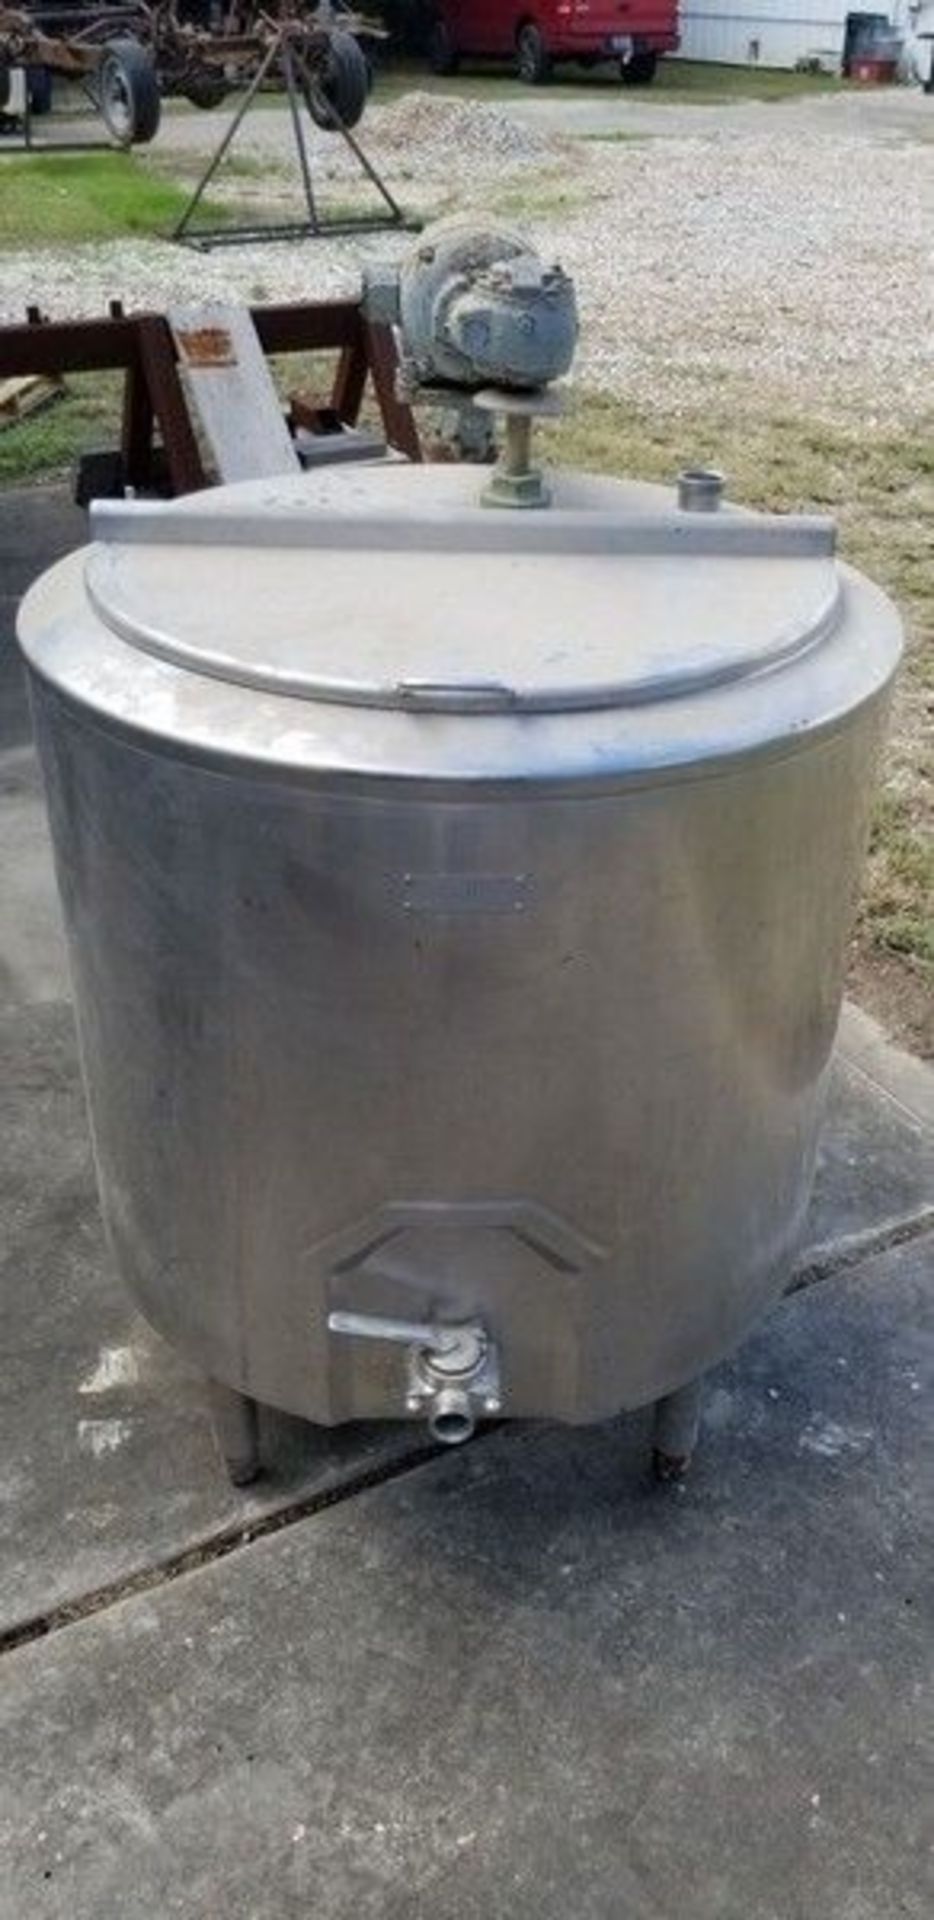 Damrow 100 Gal. S/S Tank, M/N 100-GA, S/N 951121, Type V-H, with S/S Hinge Lids, with Top Mounted - Image 3 of 6